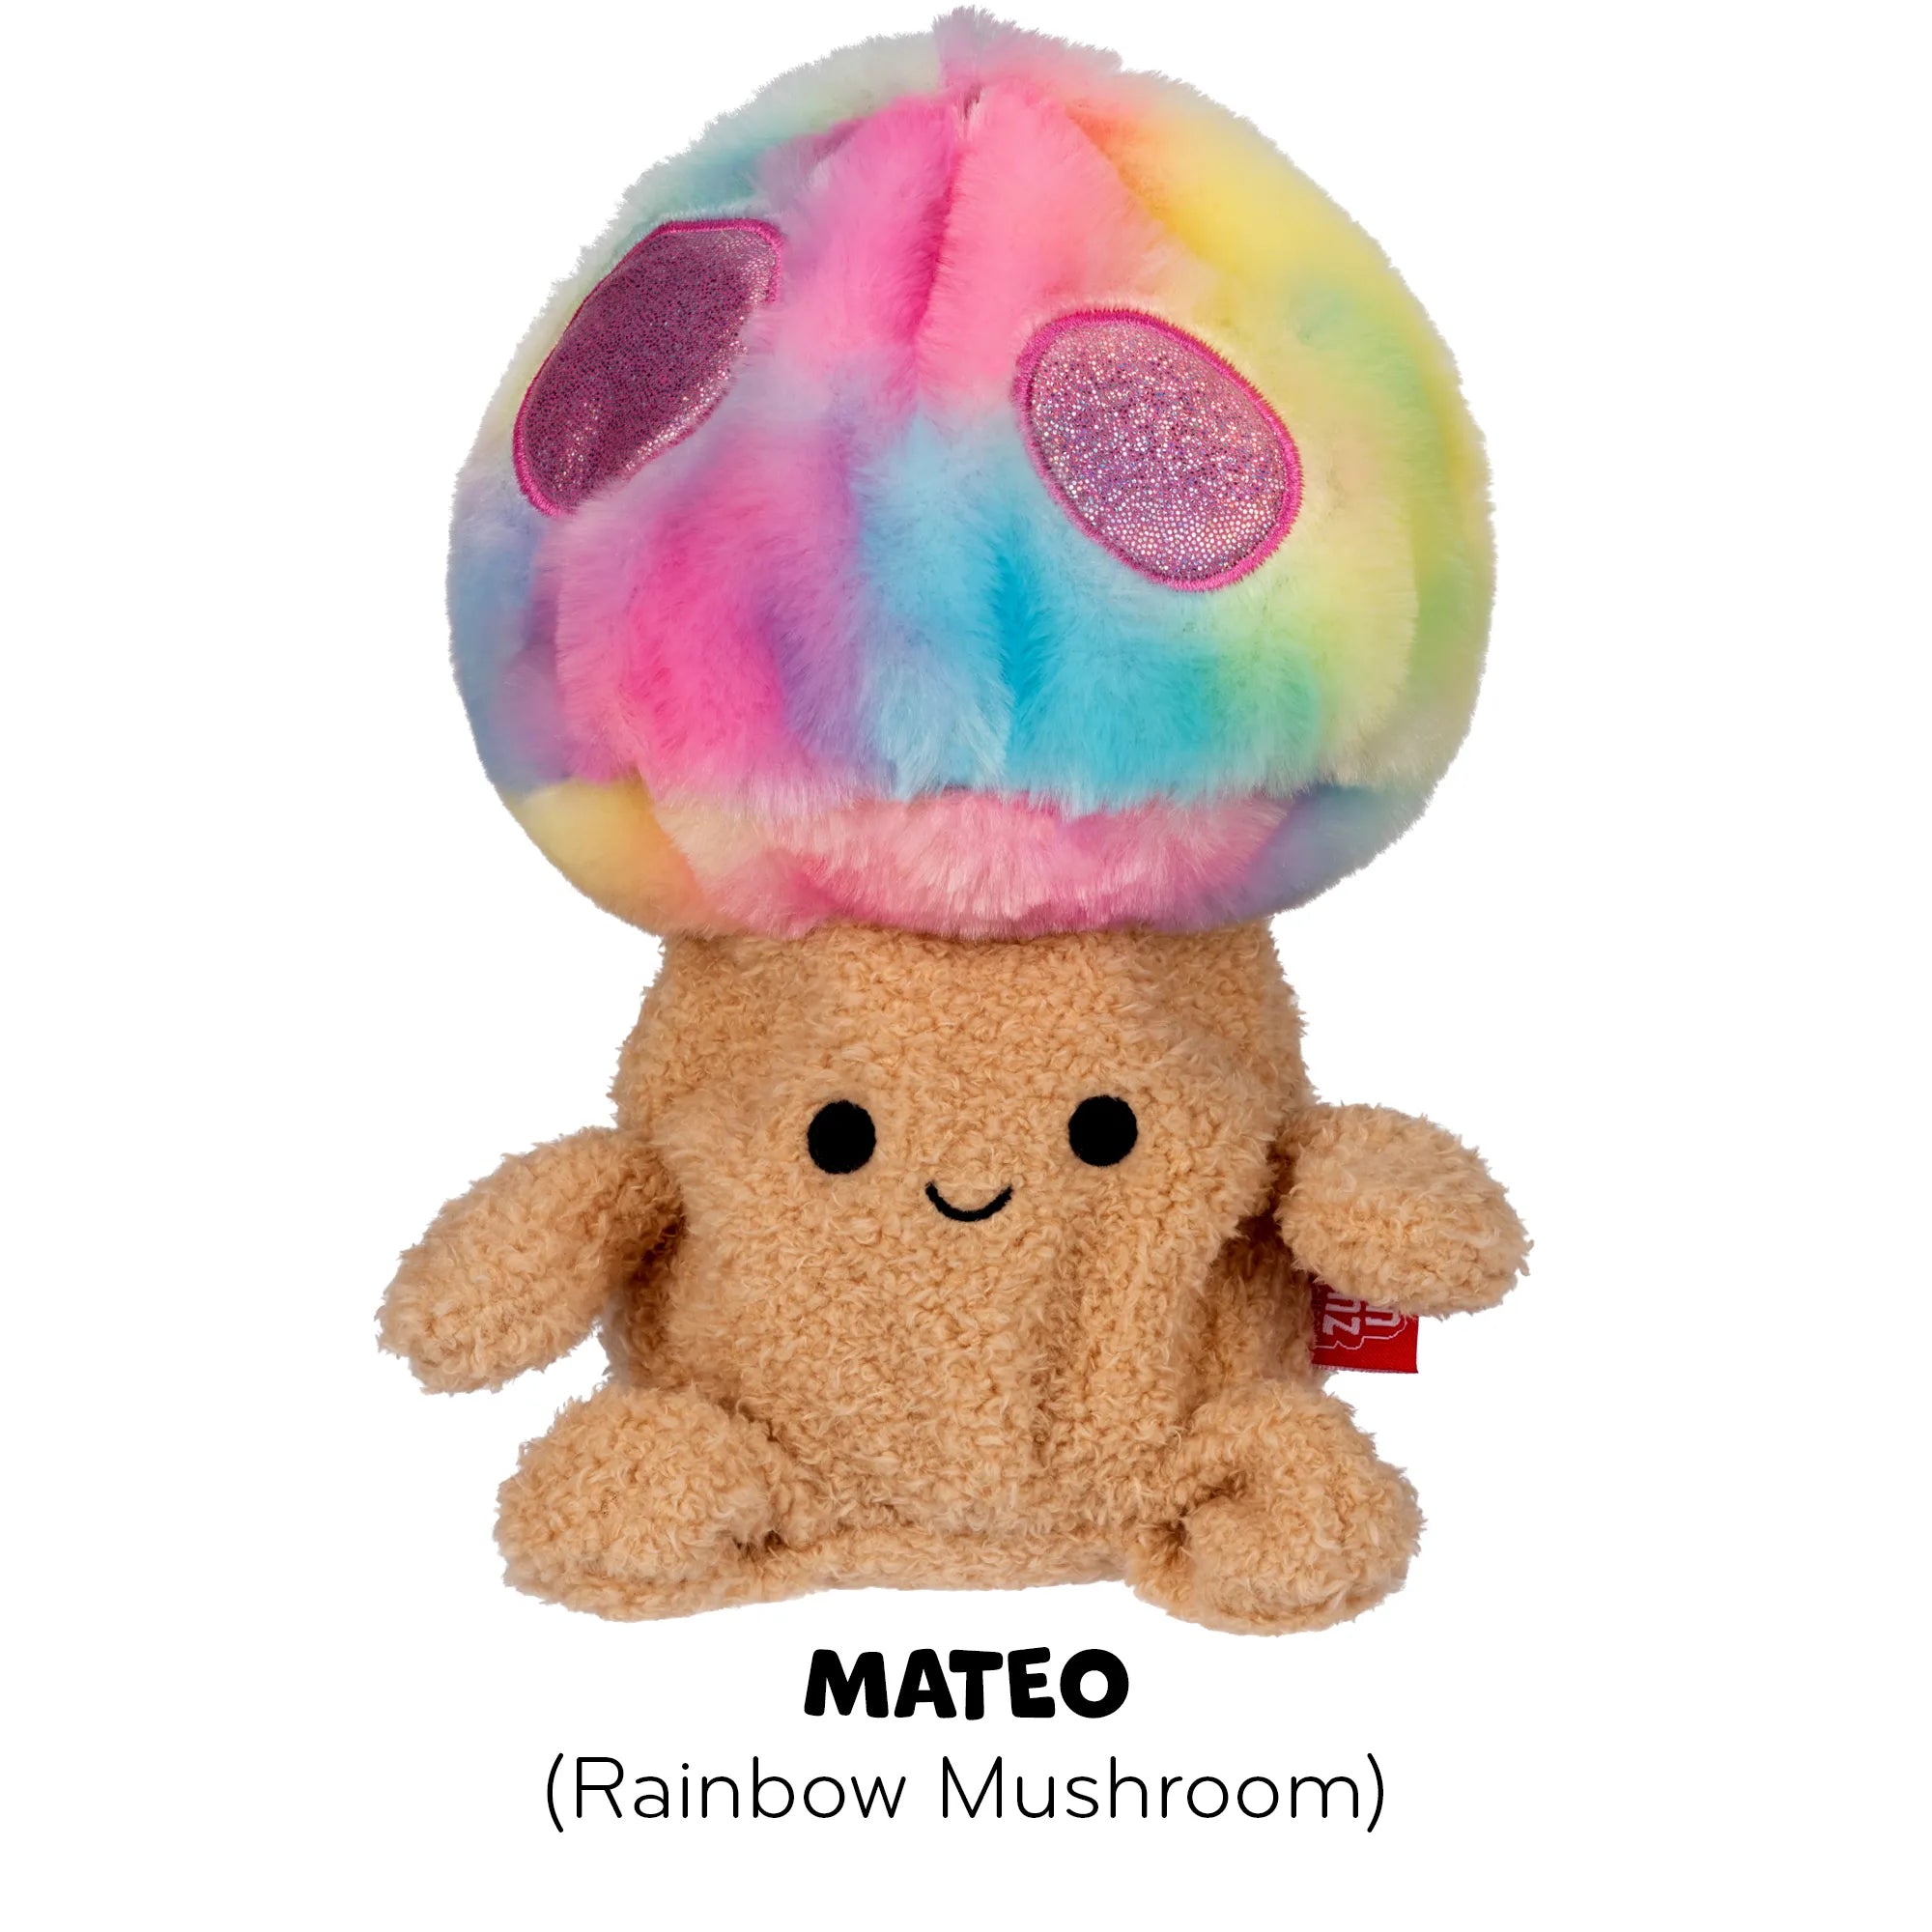 BumBumz 7.5” Garden Series - Collectibles - Rainbow Mushroom 'Mateo' - Ages 3-Adult - Brown's Hobby & Game